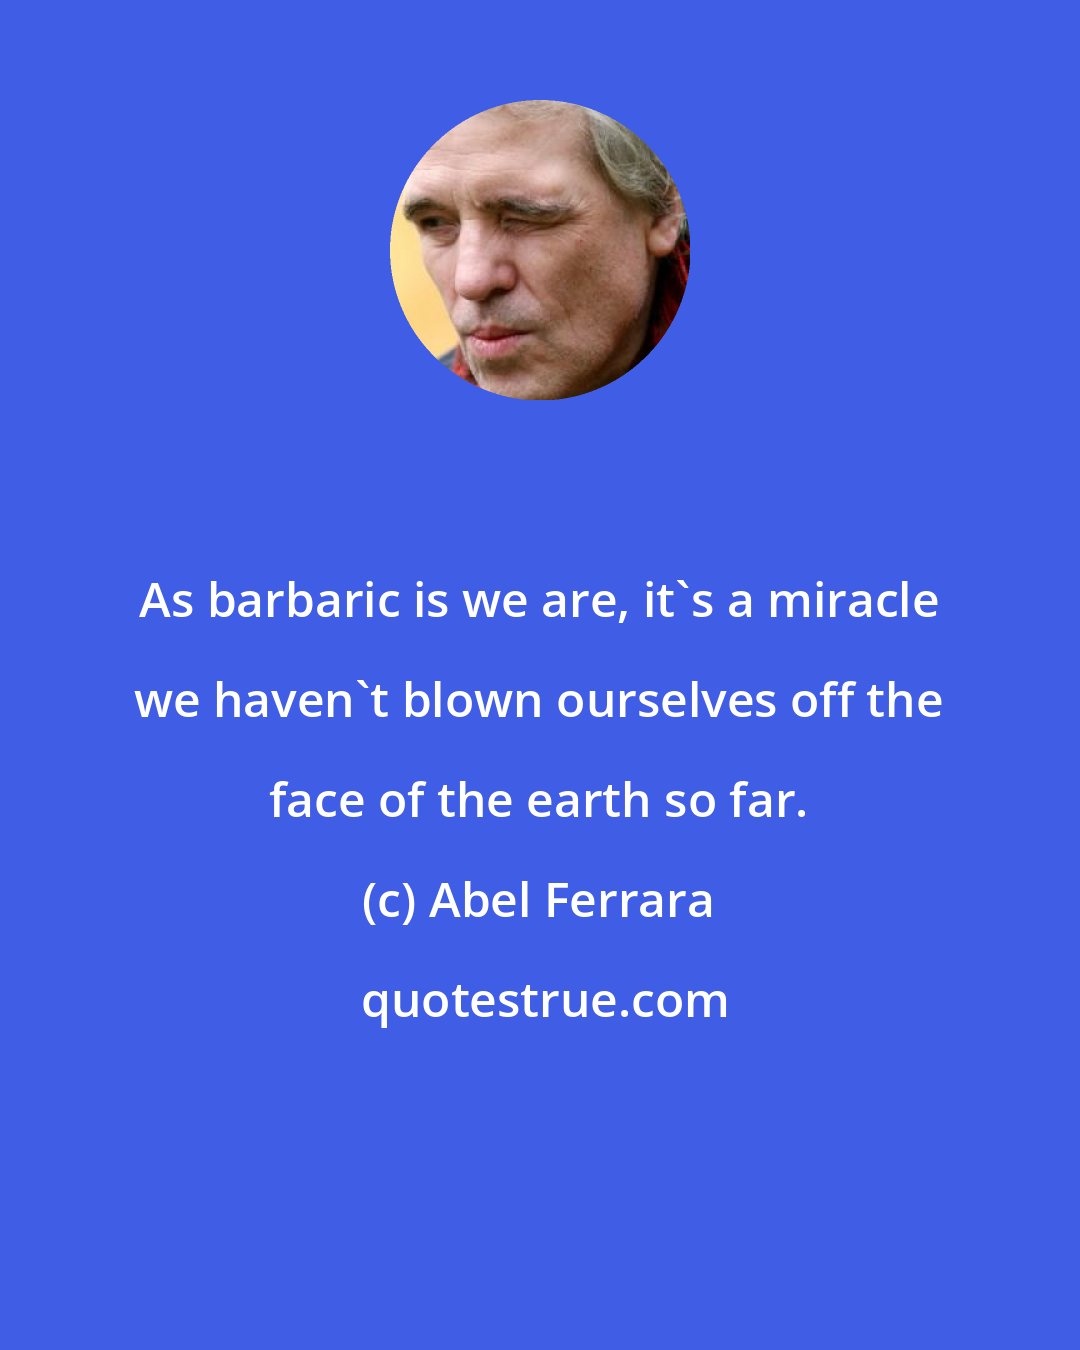 Abel Ferrara: As barbaric is we are, it's a miracle we haven't blown ourselves off the face of the earth so far.